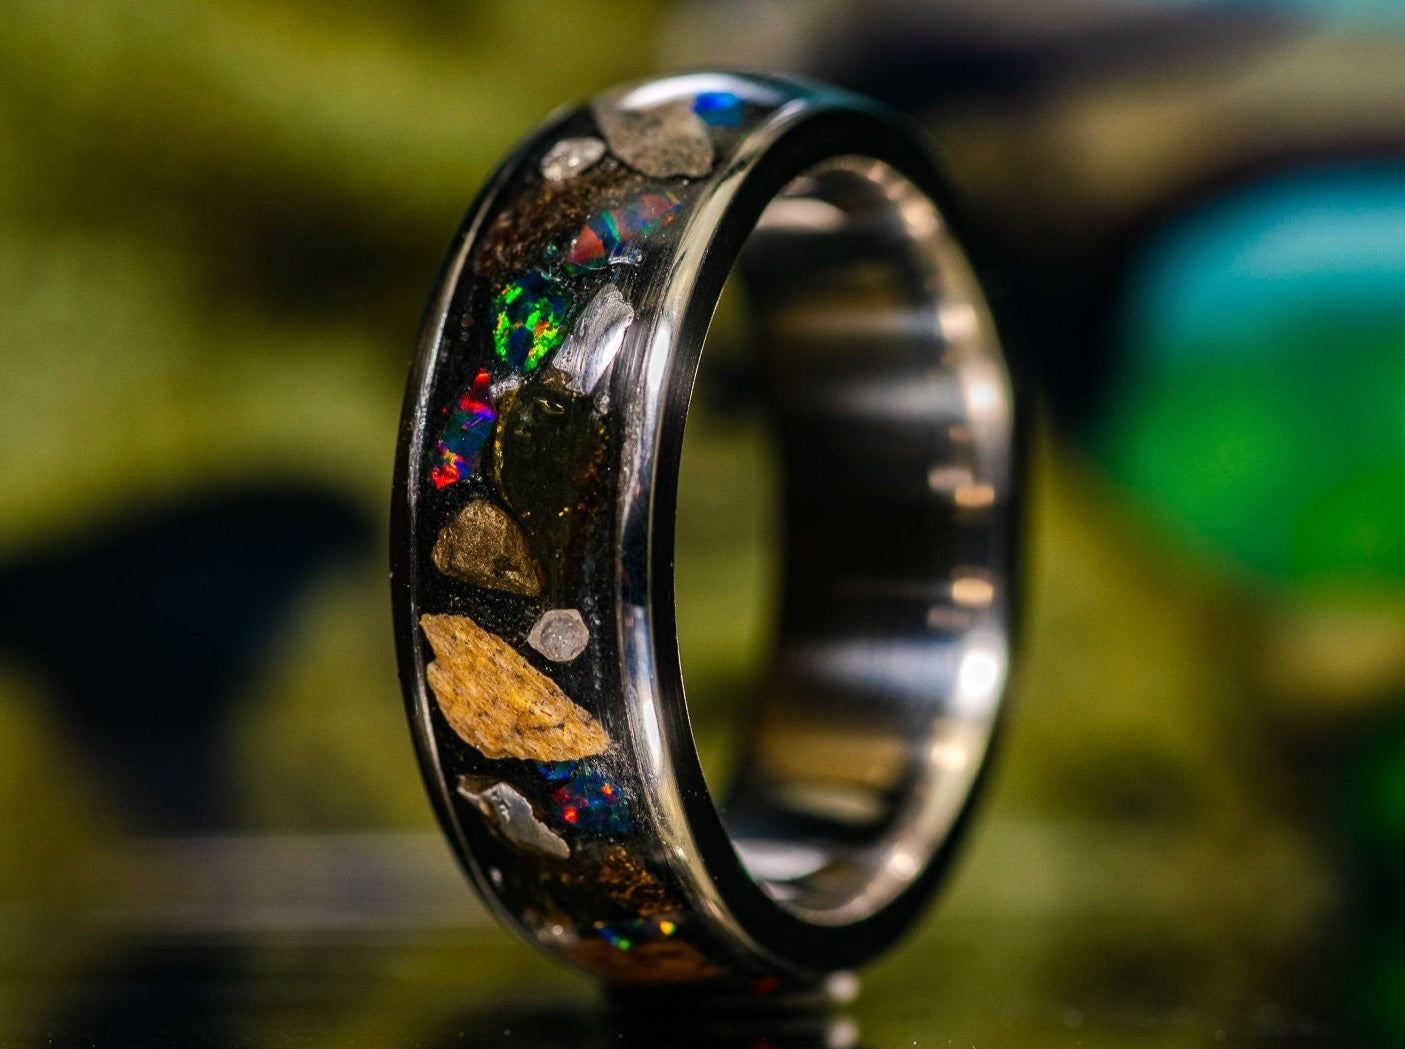 Why LOTR's Elven Rings Lost Their Power After Sauron's Death